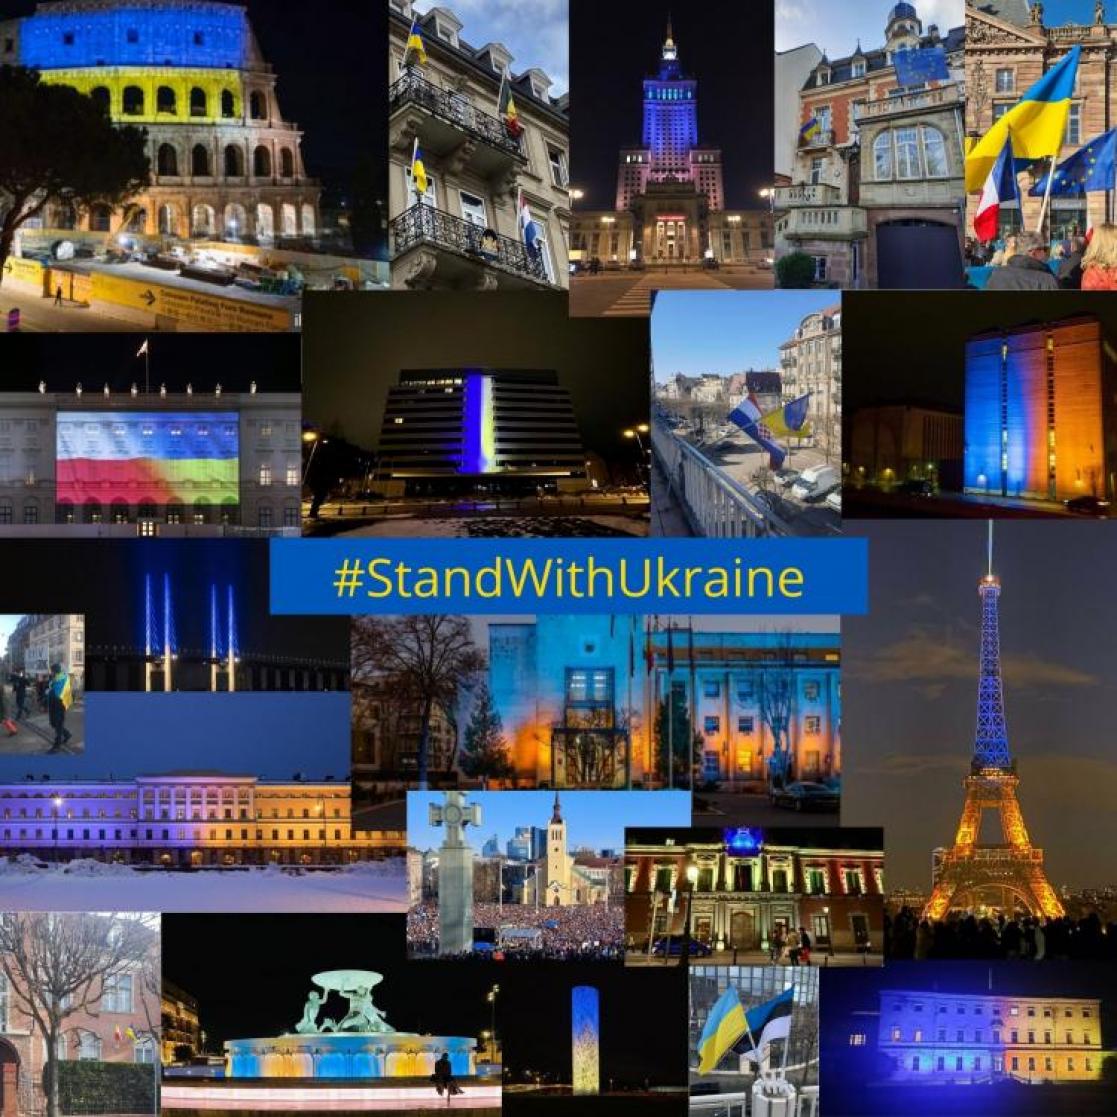 Buildings lit up in blue and yellow, colors of the Ukraine flag